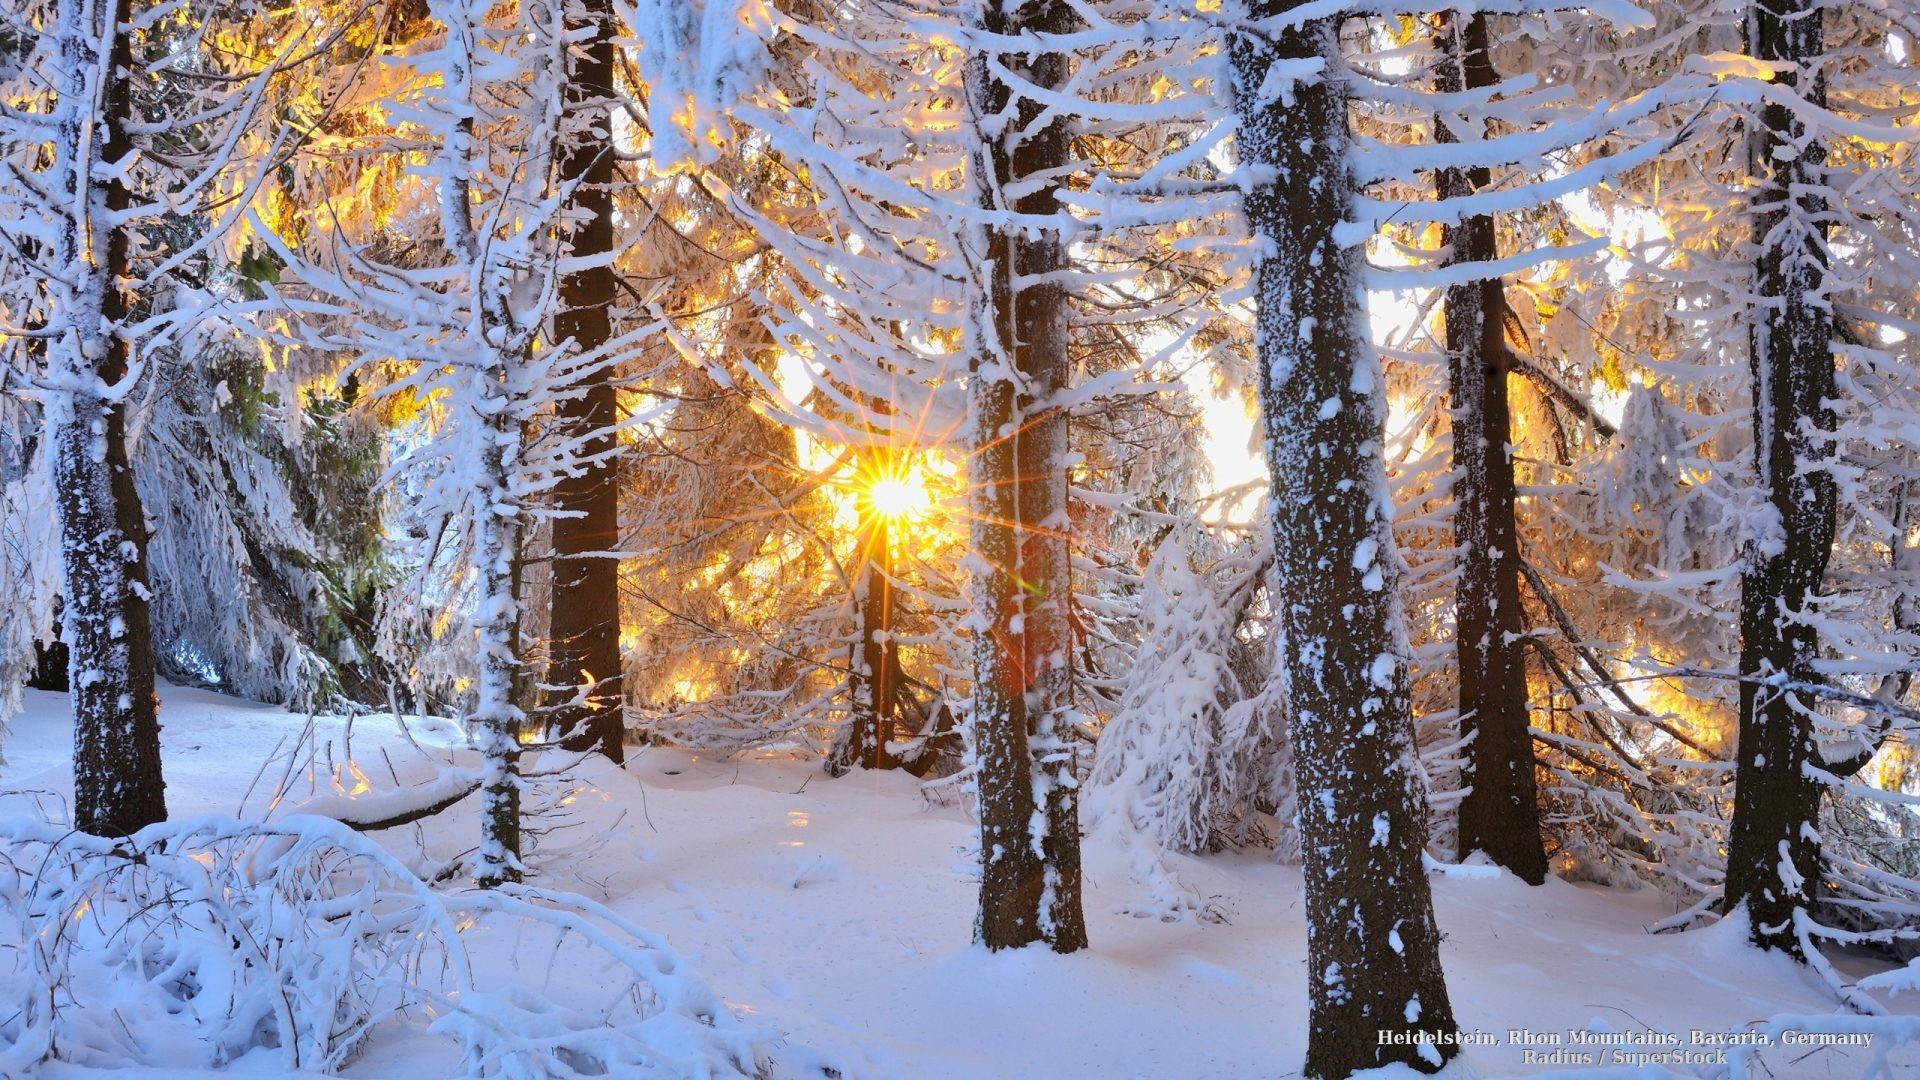 Forests Tag – Snowy Sun Snow Winter Trees Forests Forest Shining Nature  Good Picture Ideas for